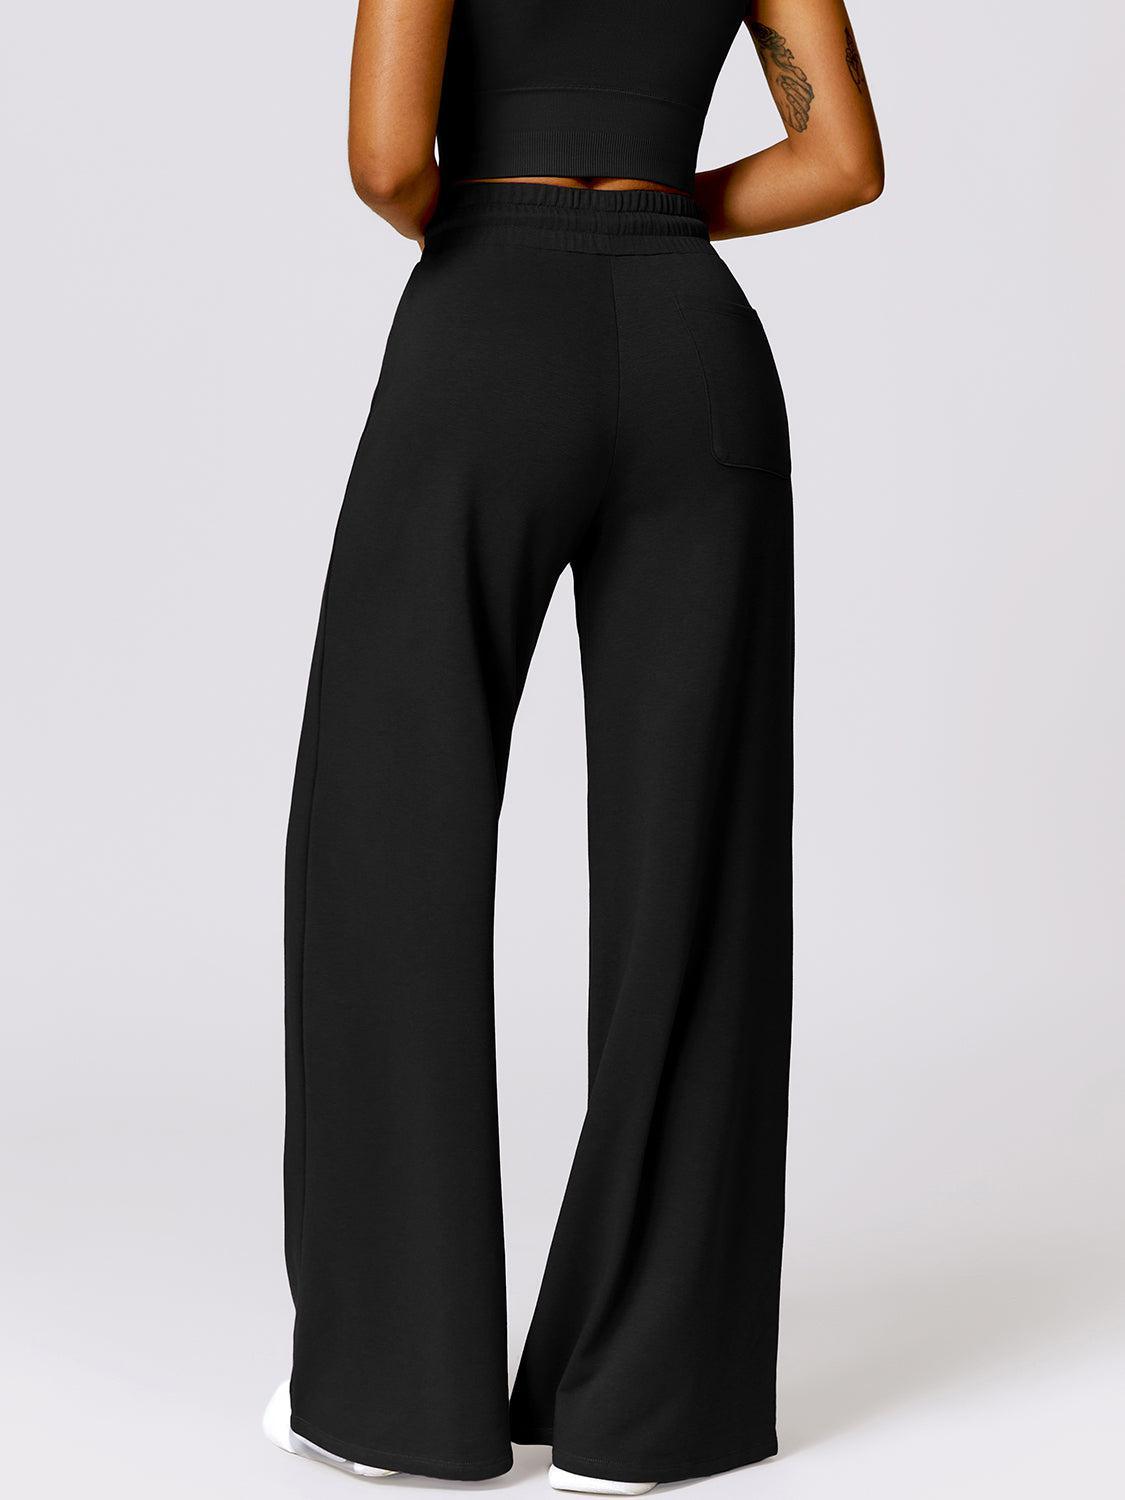 a woman wearing a black crop top and wide legged pants